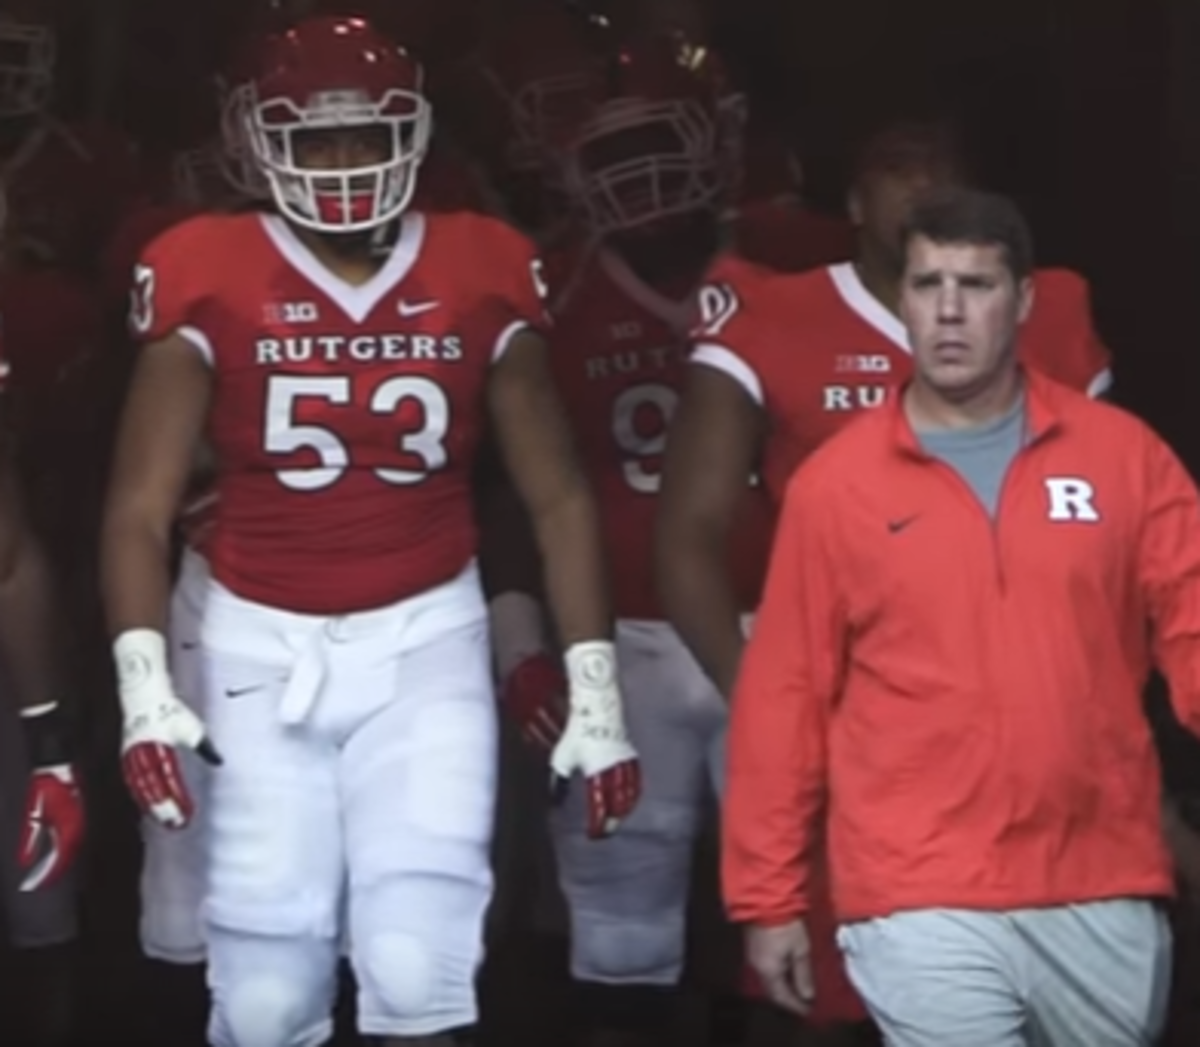 Rutgers players walk out of tunnel onto field.